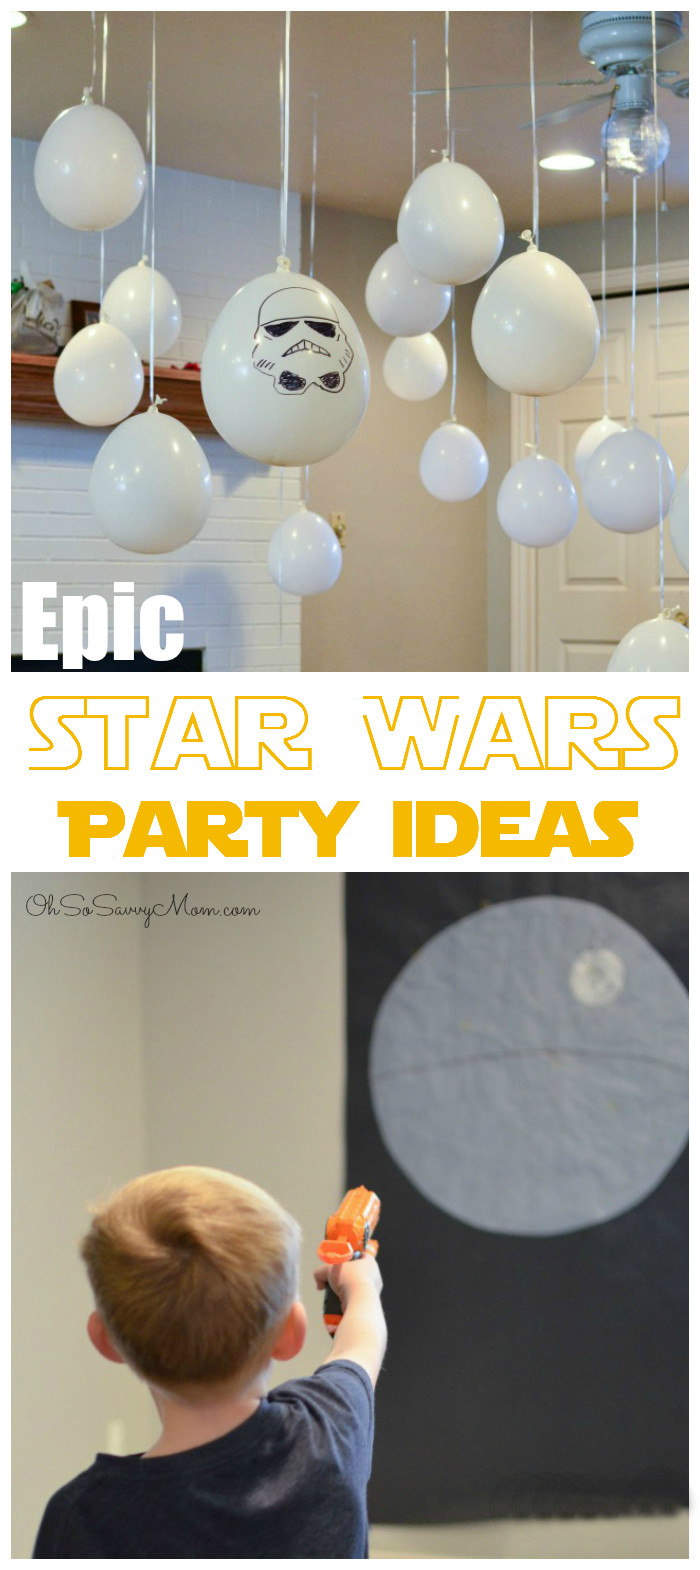 Star Wars Birthday Party Ideas
 Epic Star Wars Birthday Party Ideas on the Cheap Oh